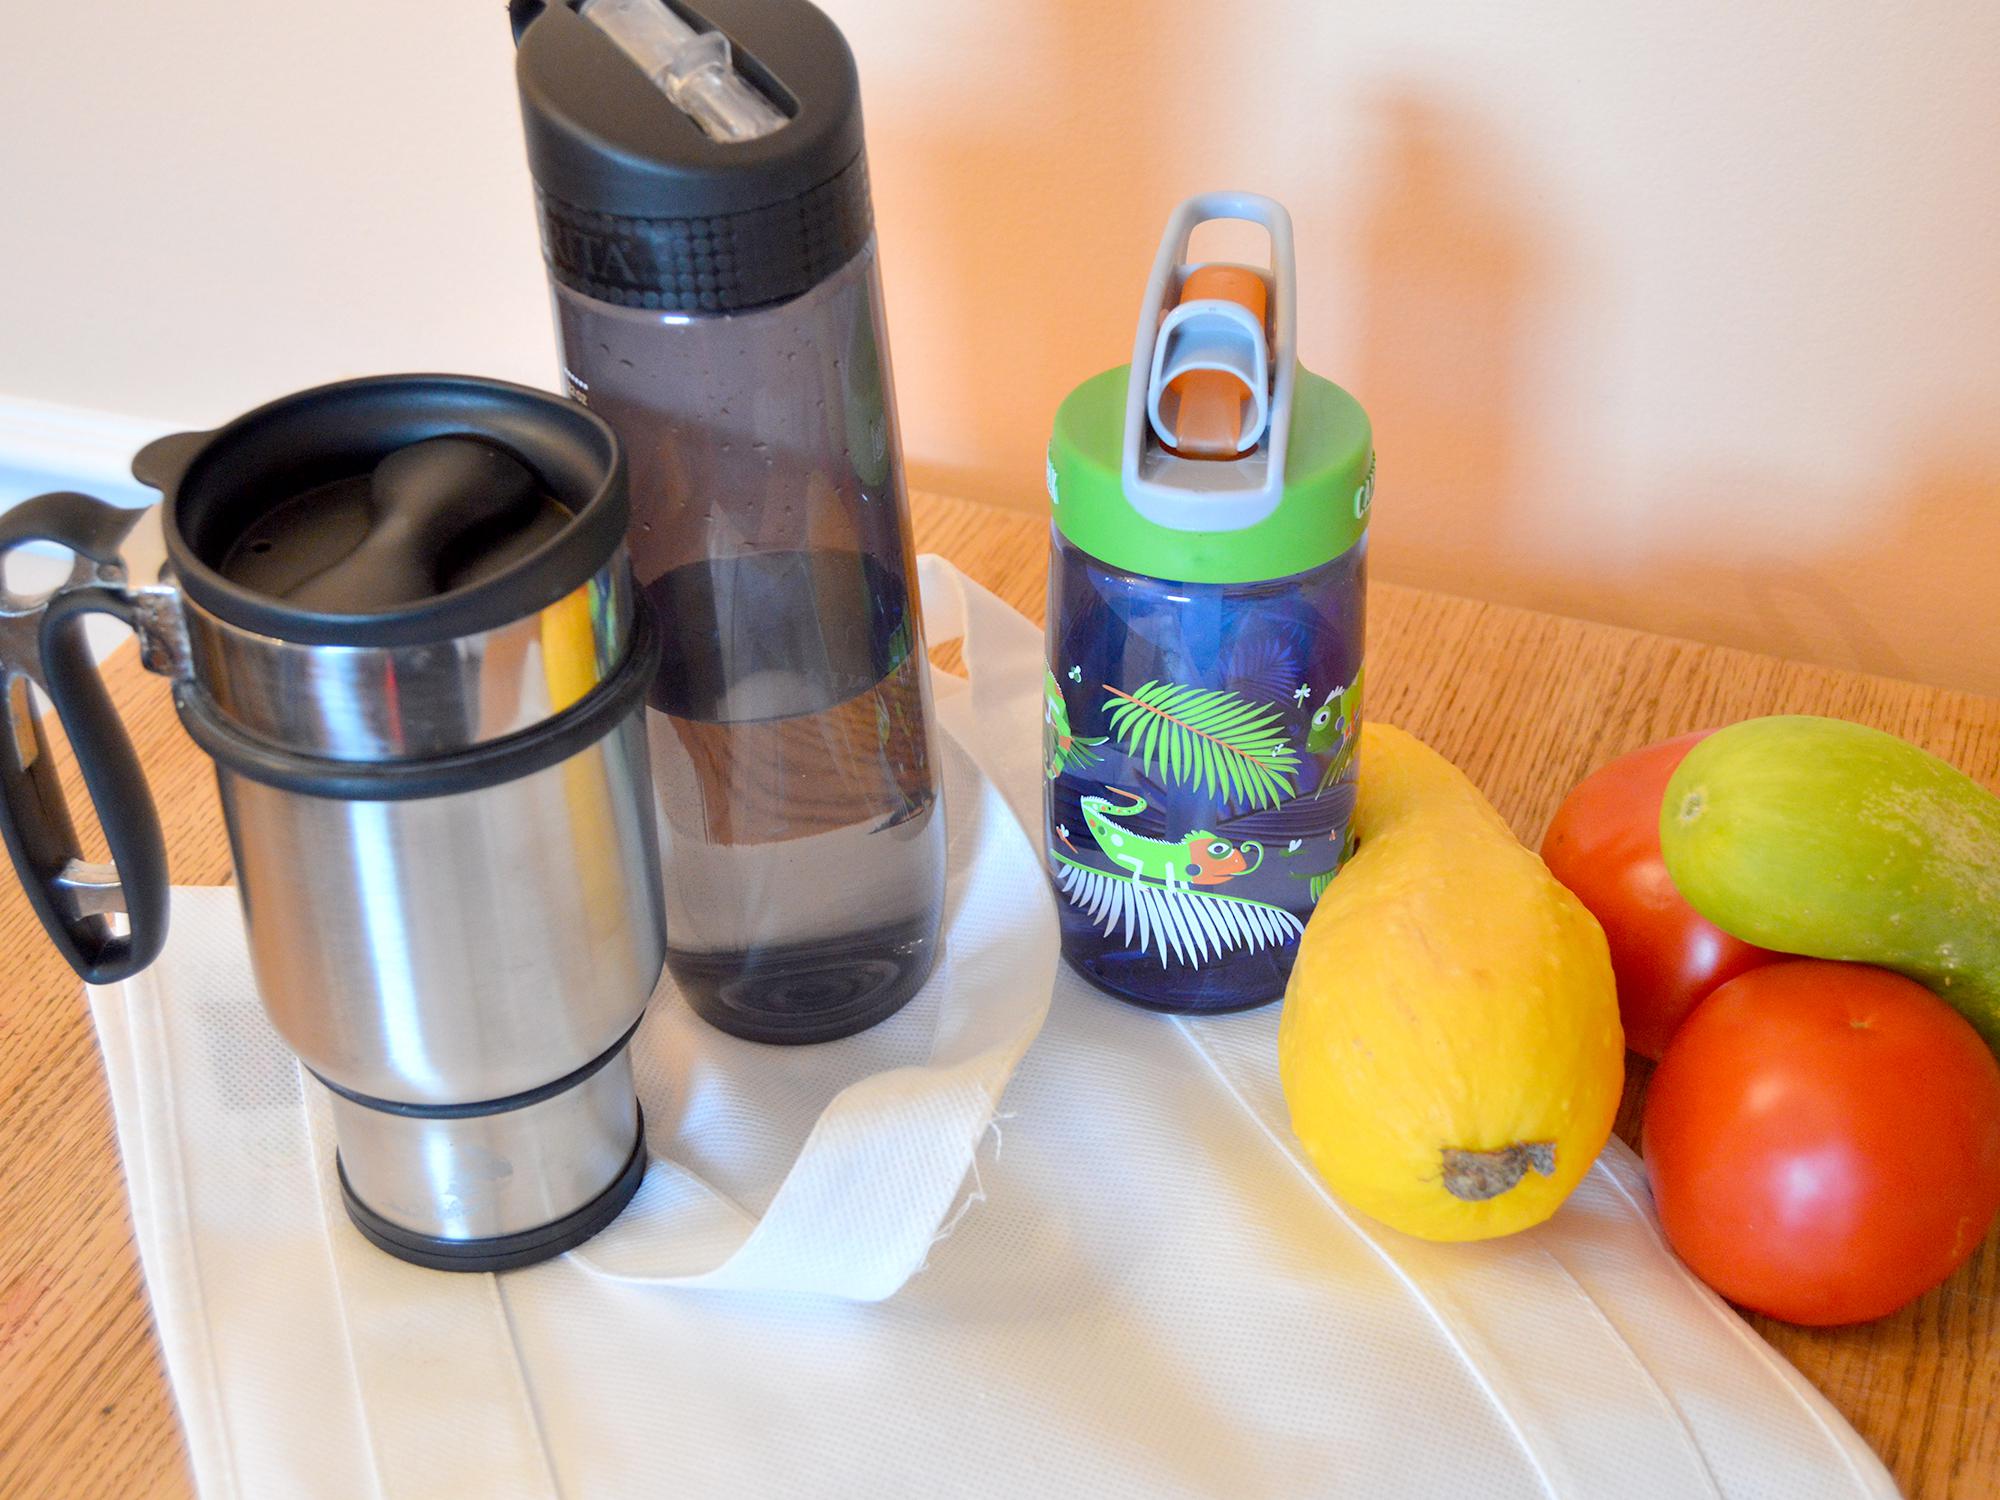 Using reusable products and eating unprocessed foods are good for the environment and simple steps along the path in the “going green” journey. (Photo by MSU Extension Service/Beth Baker)